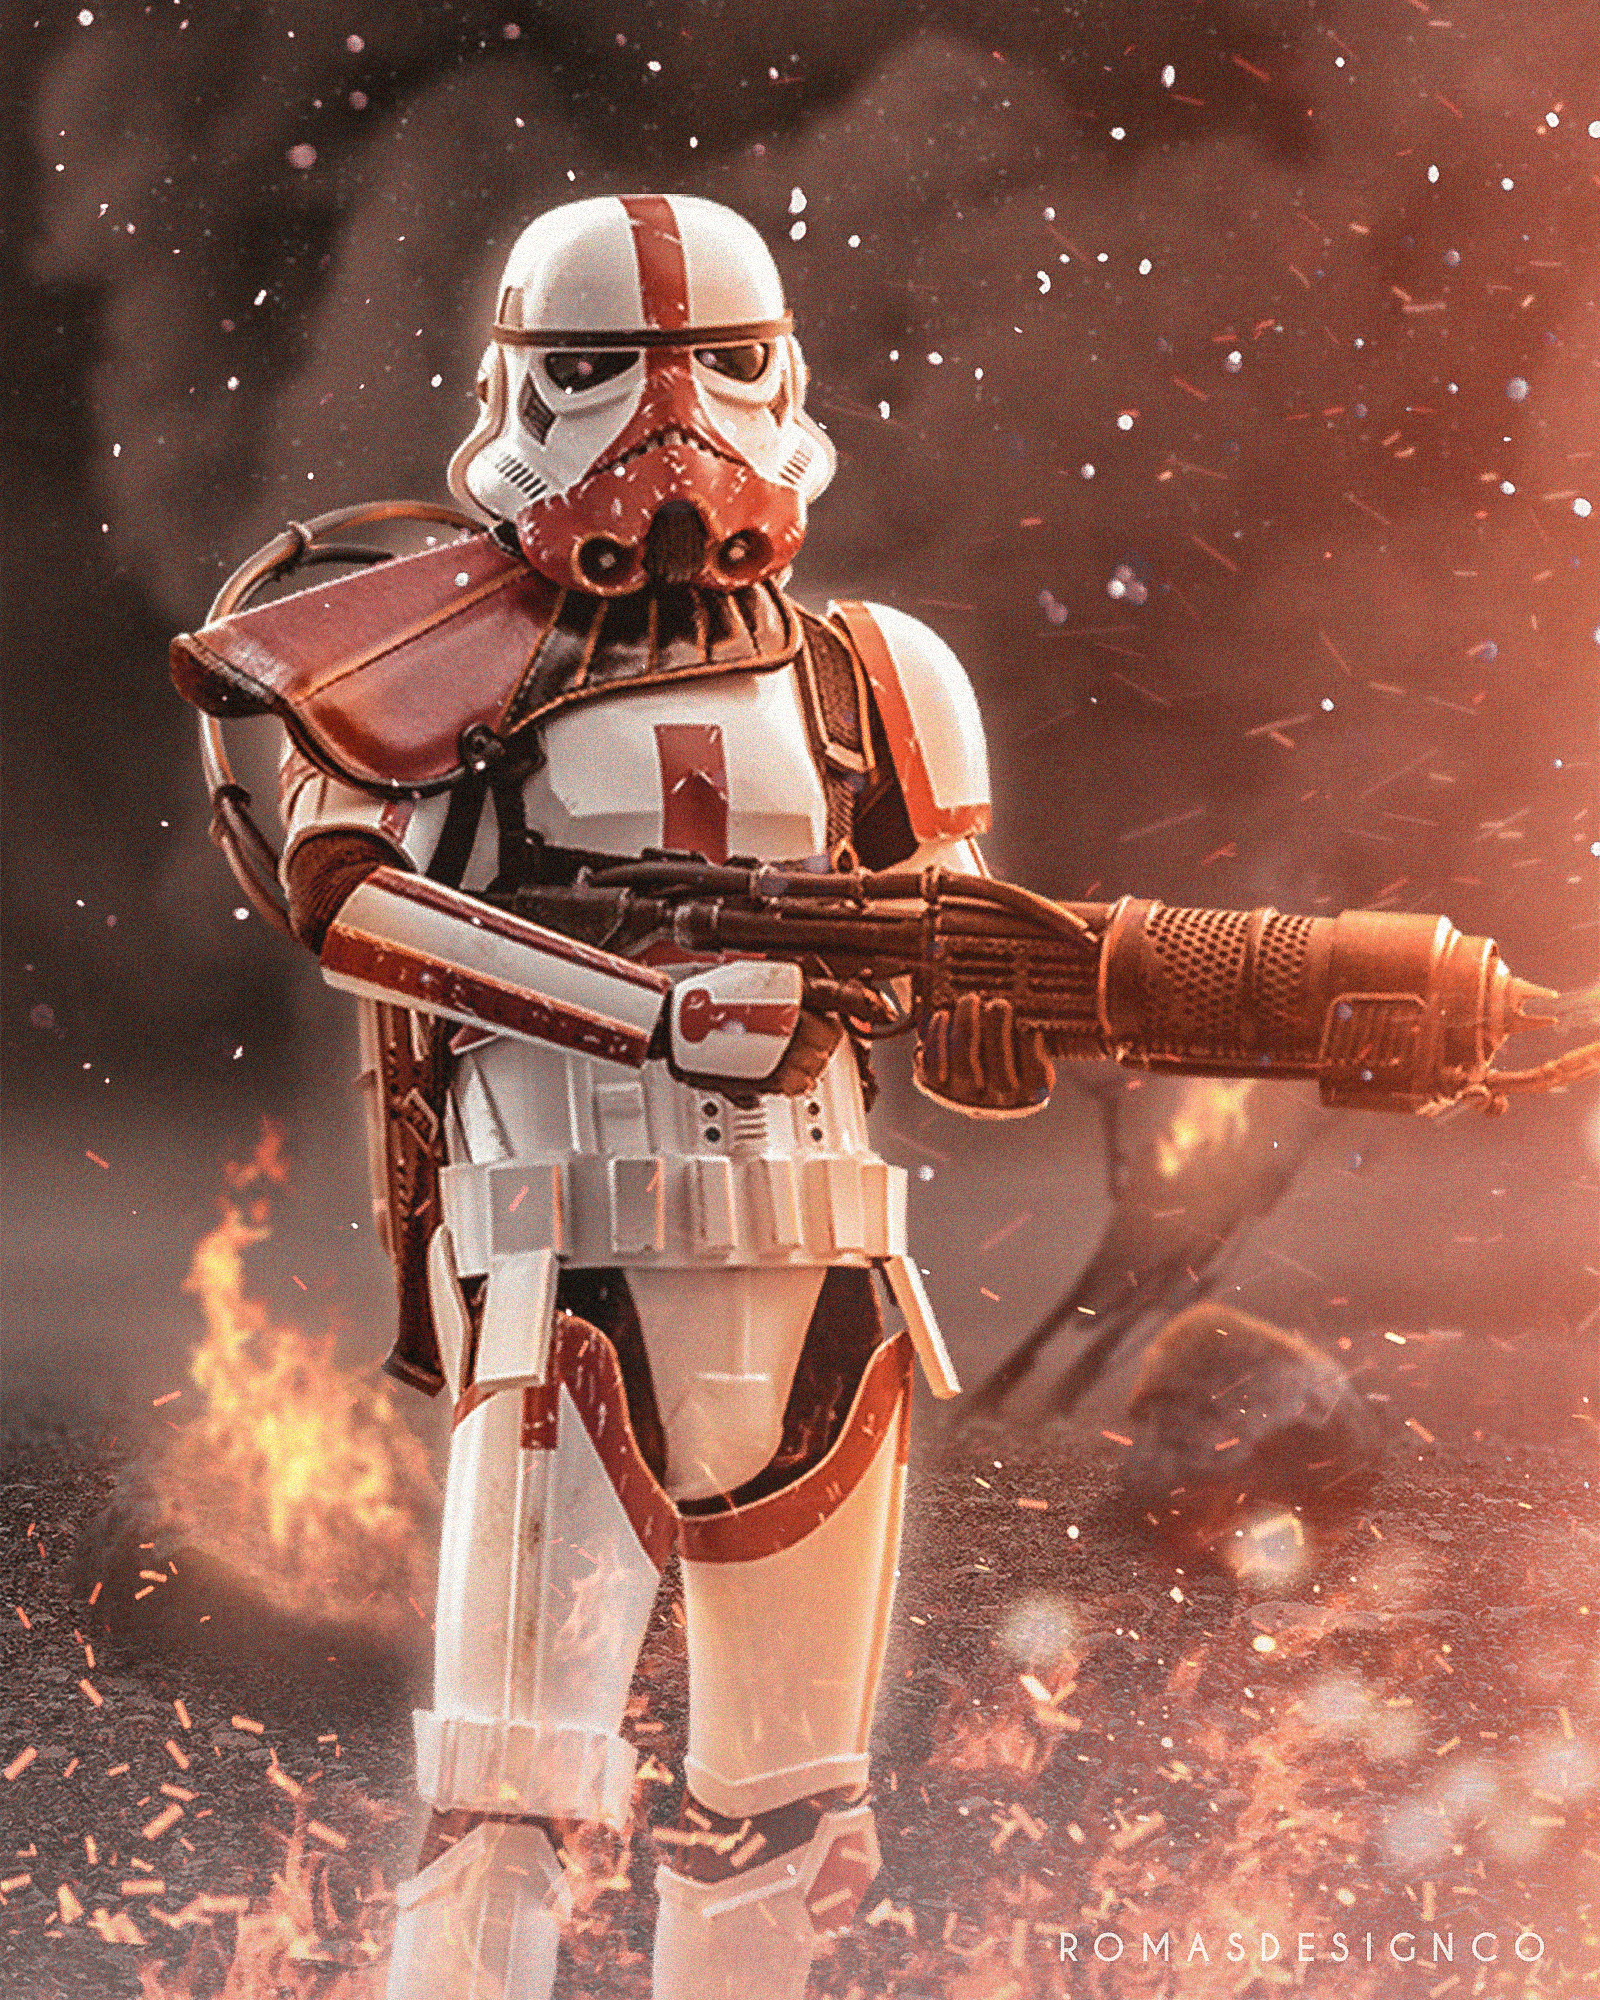 Took an image of the Hot Toys Incinerator Stormtrooper and decided to make a poster